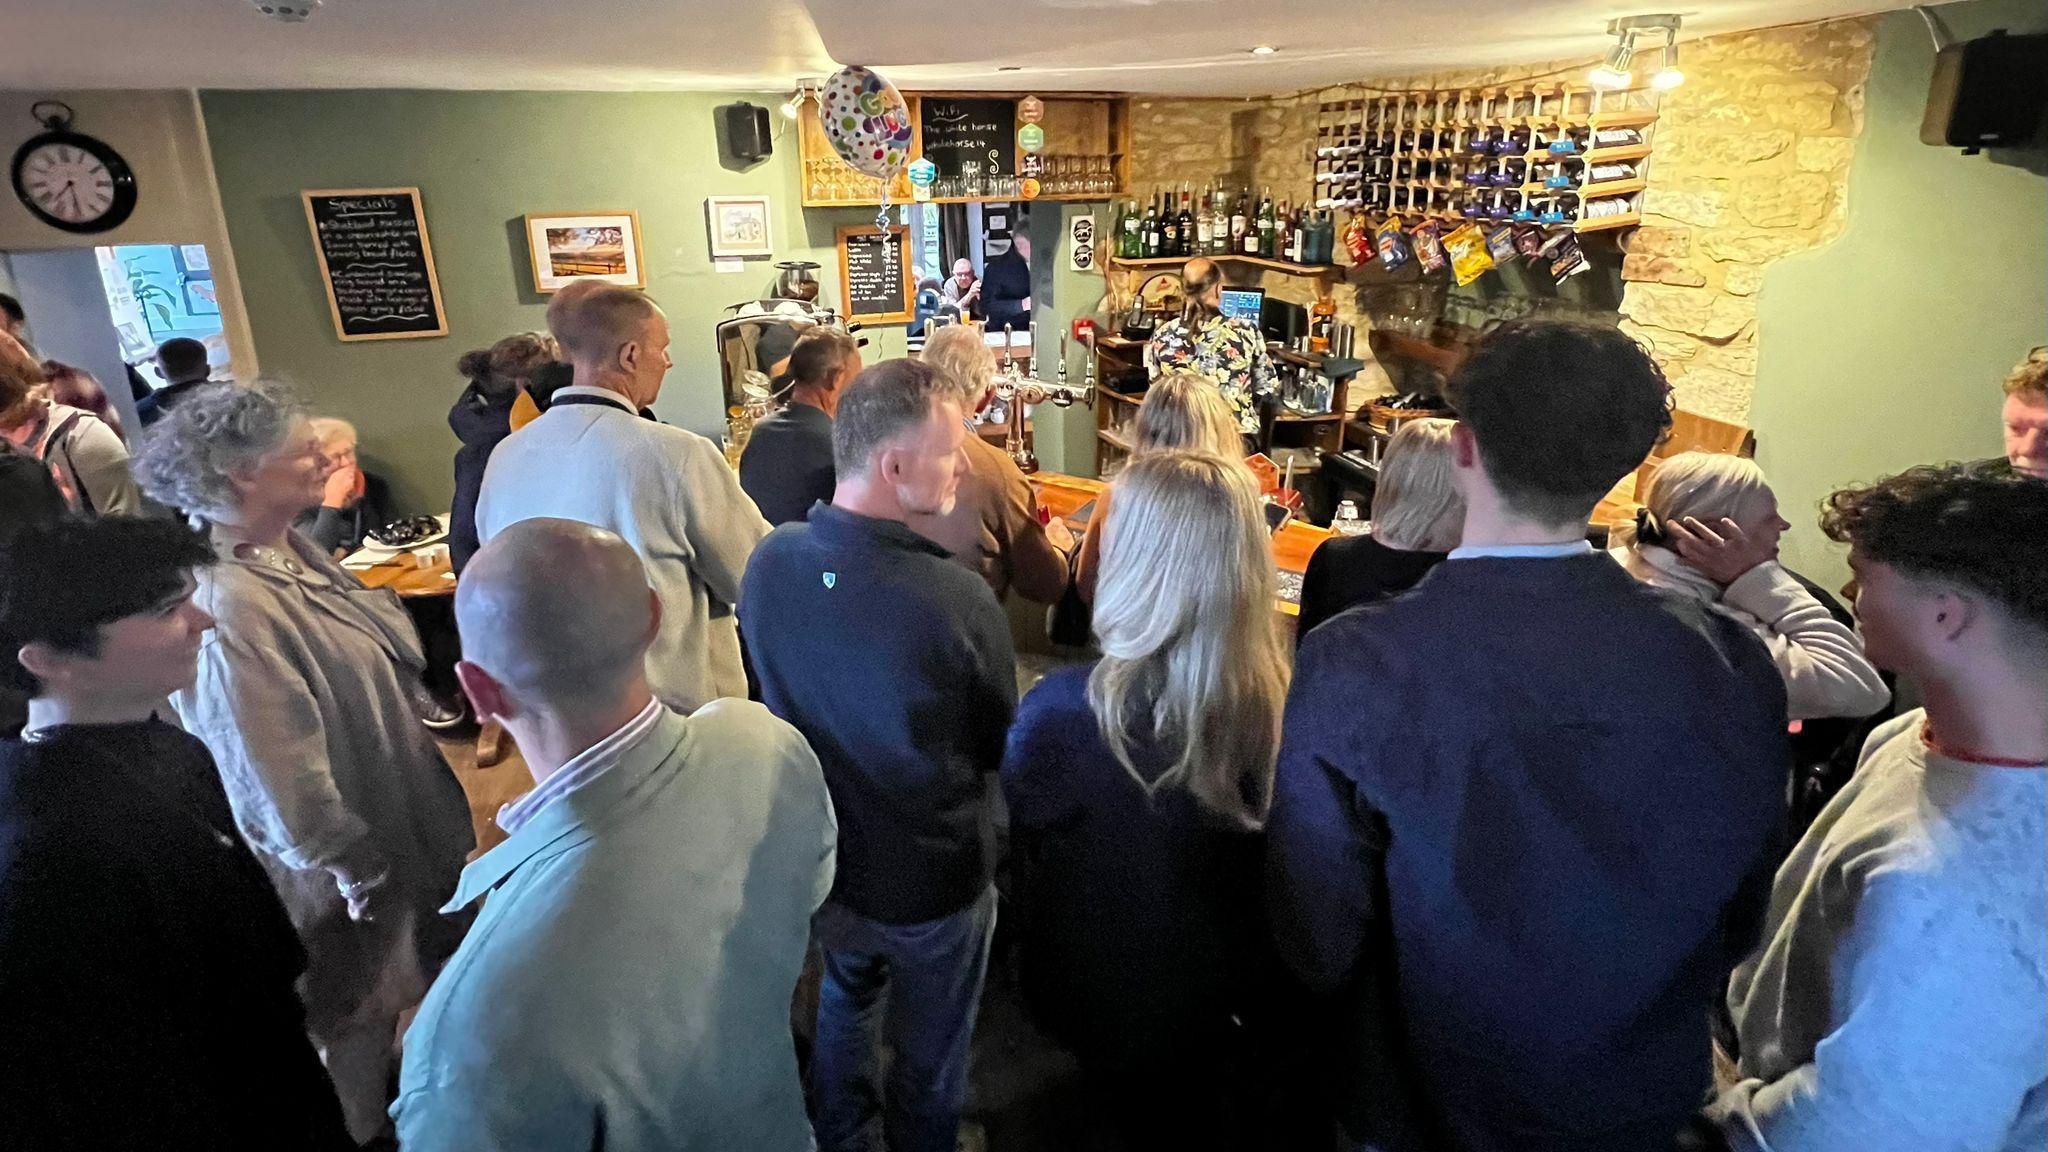 People stand at the bar inside the White Horse pub